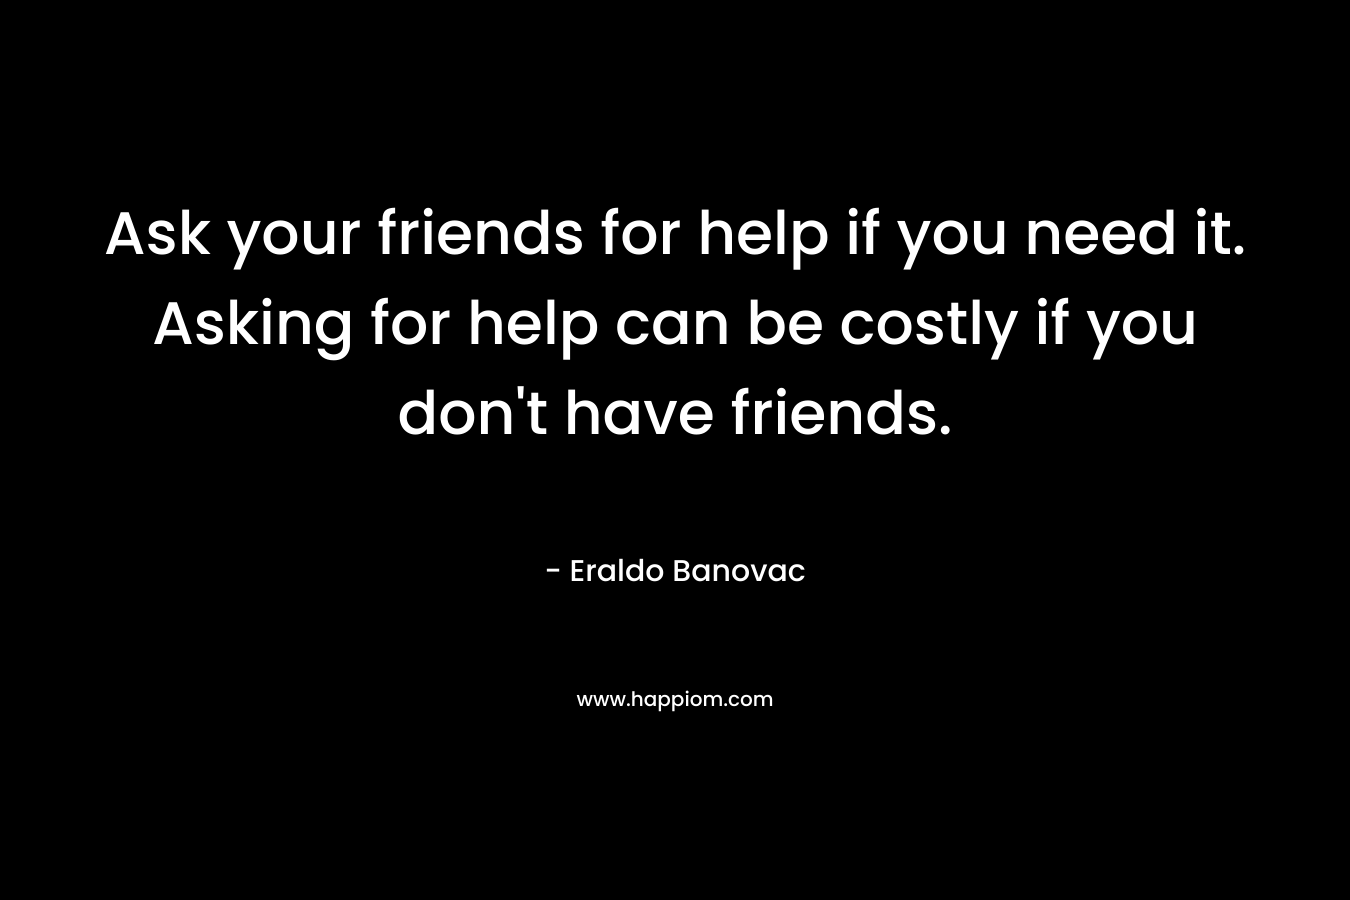 Ask your friends for help if you need it. Asking for help can be costly if you don't have friends.